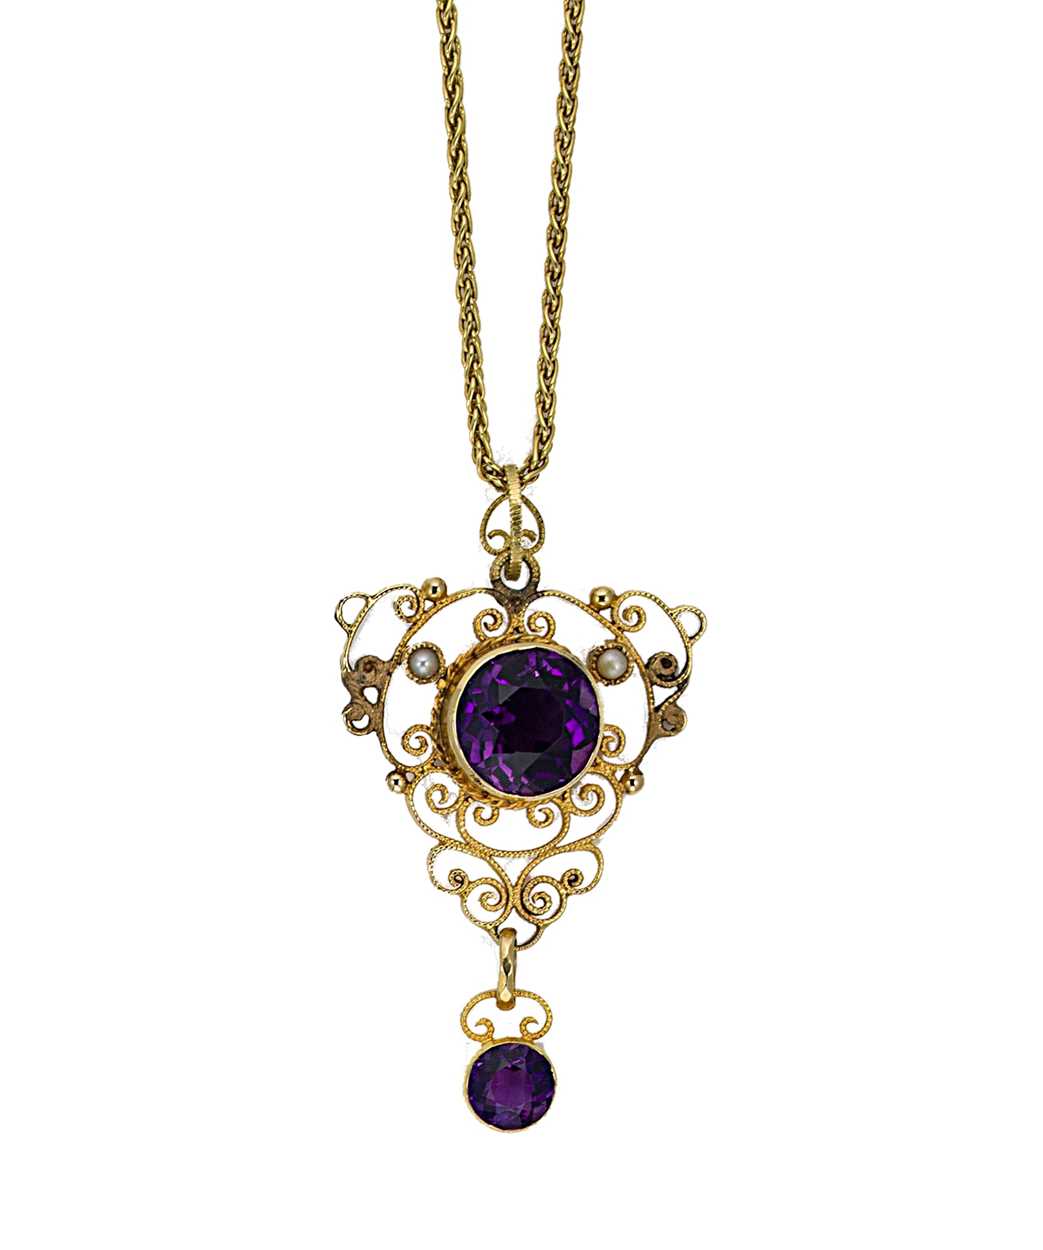 An amethyst pendant and chain,